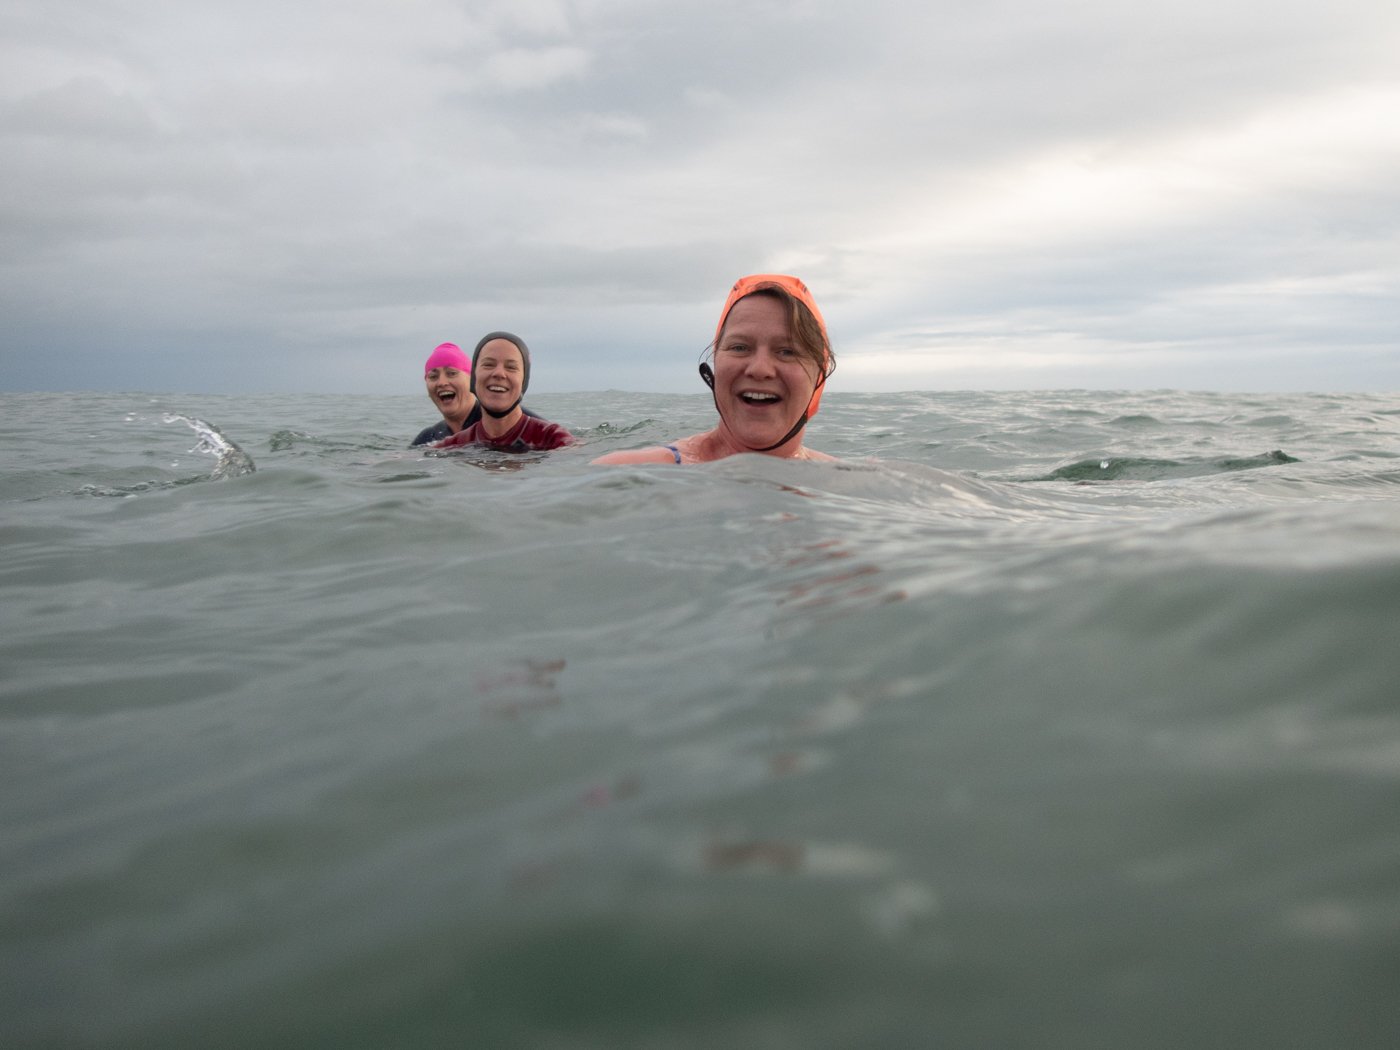  View from the Sea is a photographic/video project Giita made during the first year and a half of Covid, while swimming in the sea at the 40ft and Sandycove, Dublin. In a time of restrictions, swimming in the sea with her three friends and documentin